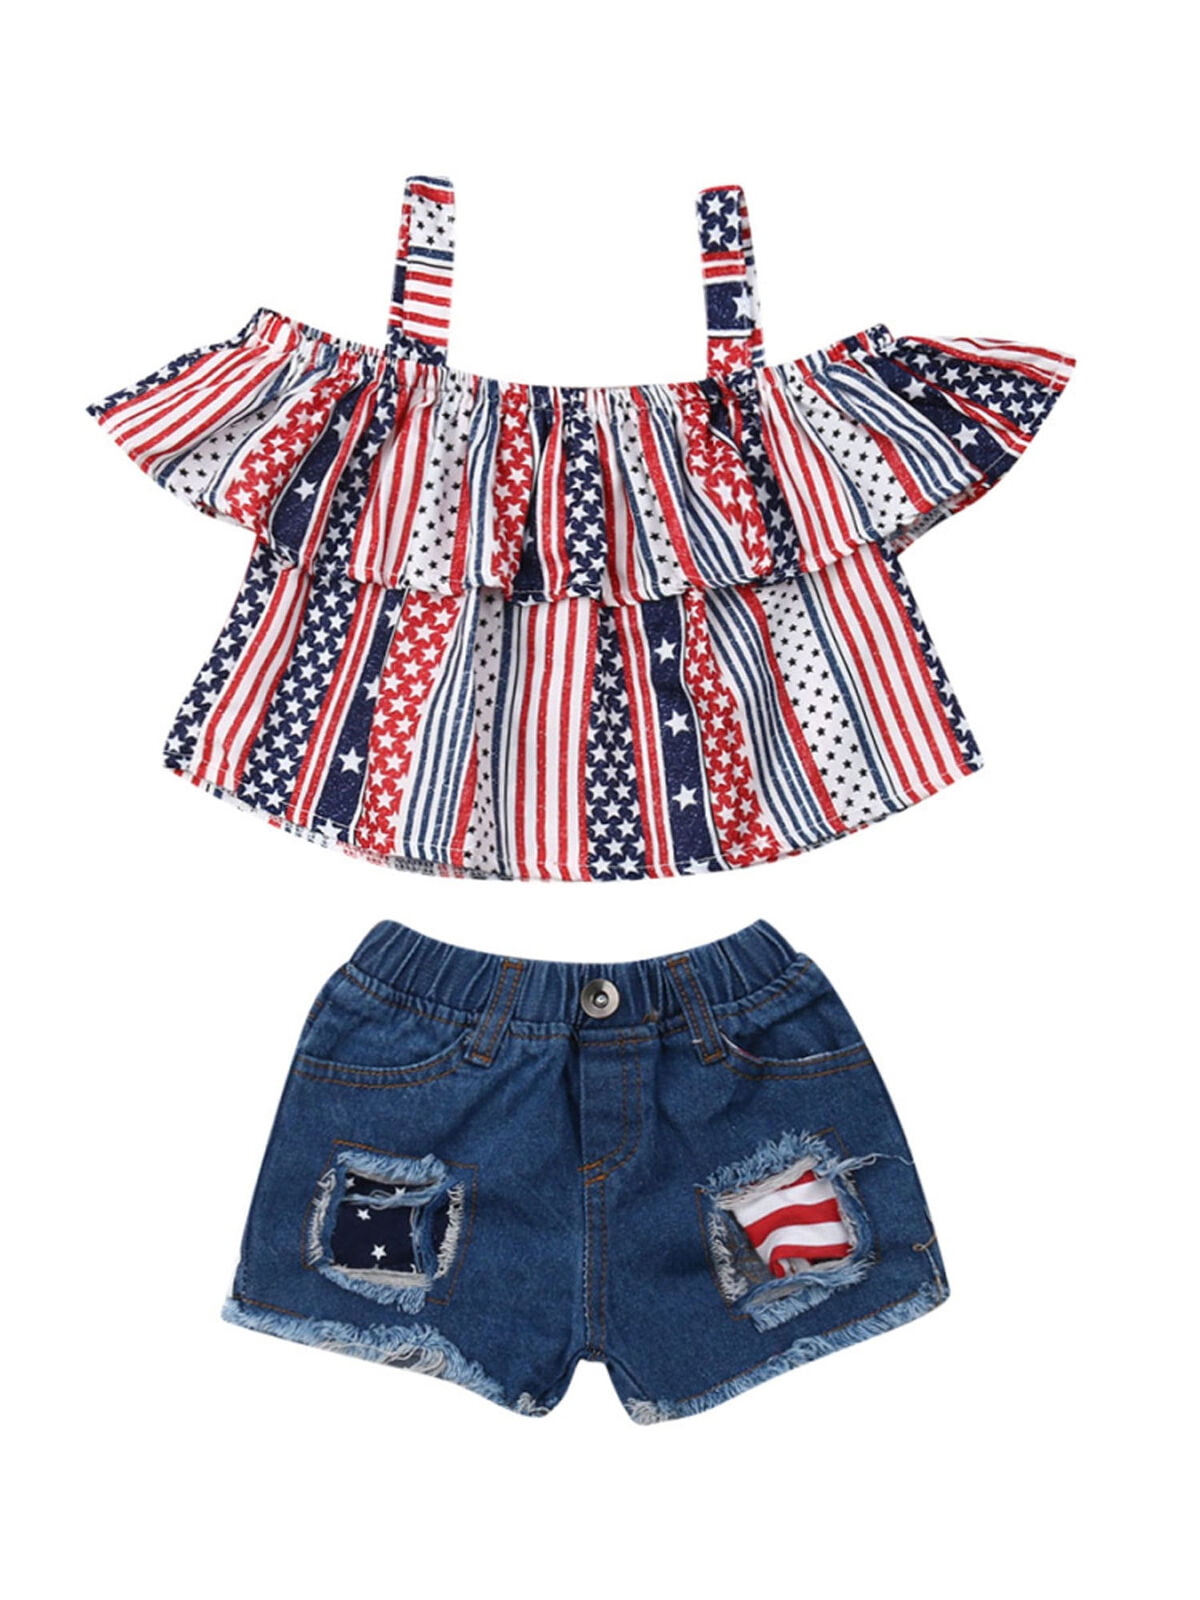 Toddler Kids Baby Girls Summer Clothes Set American Flag Stars Off ...